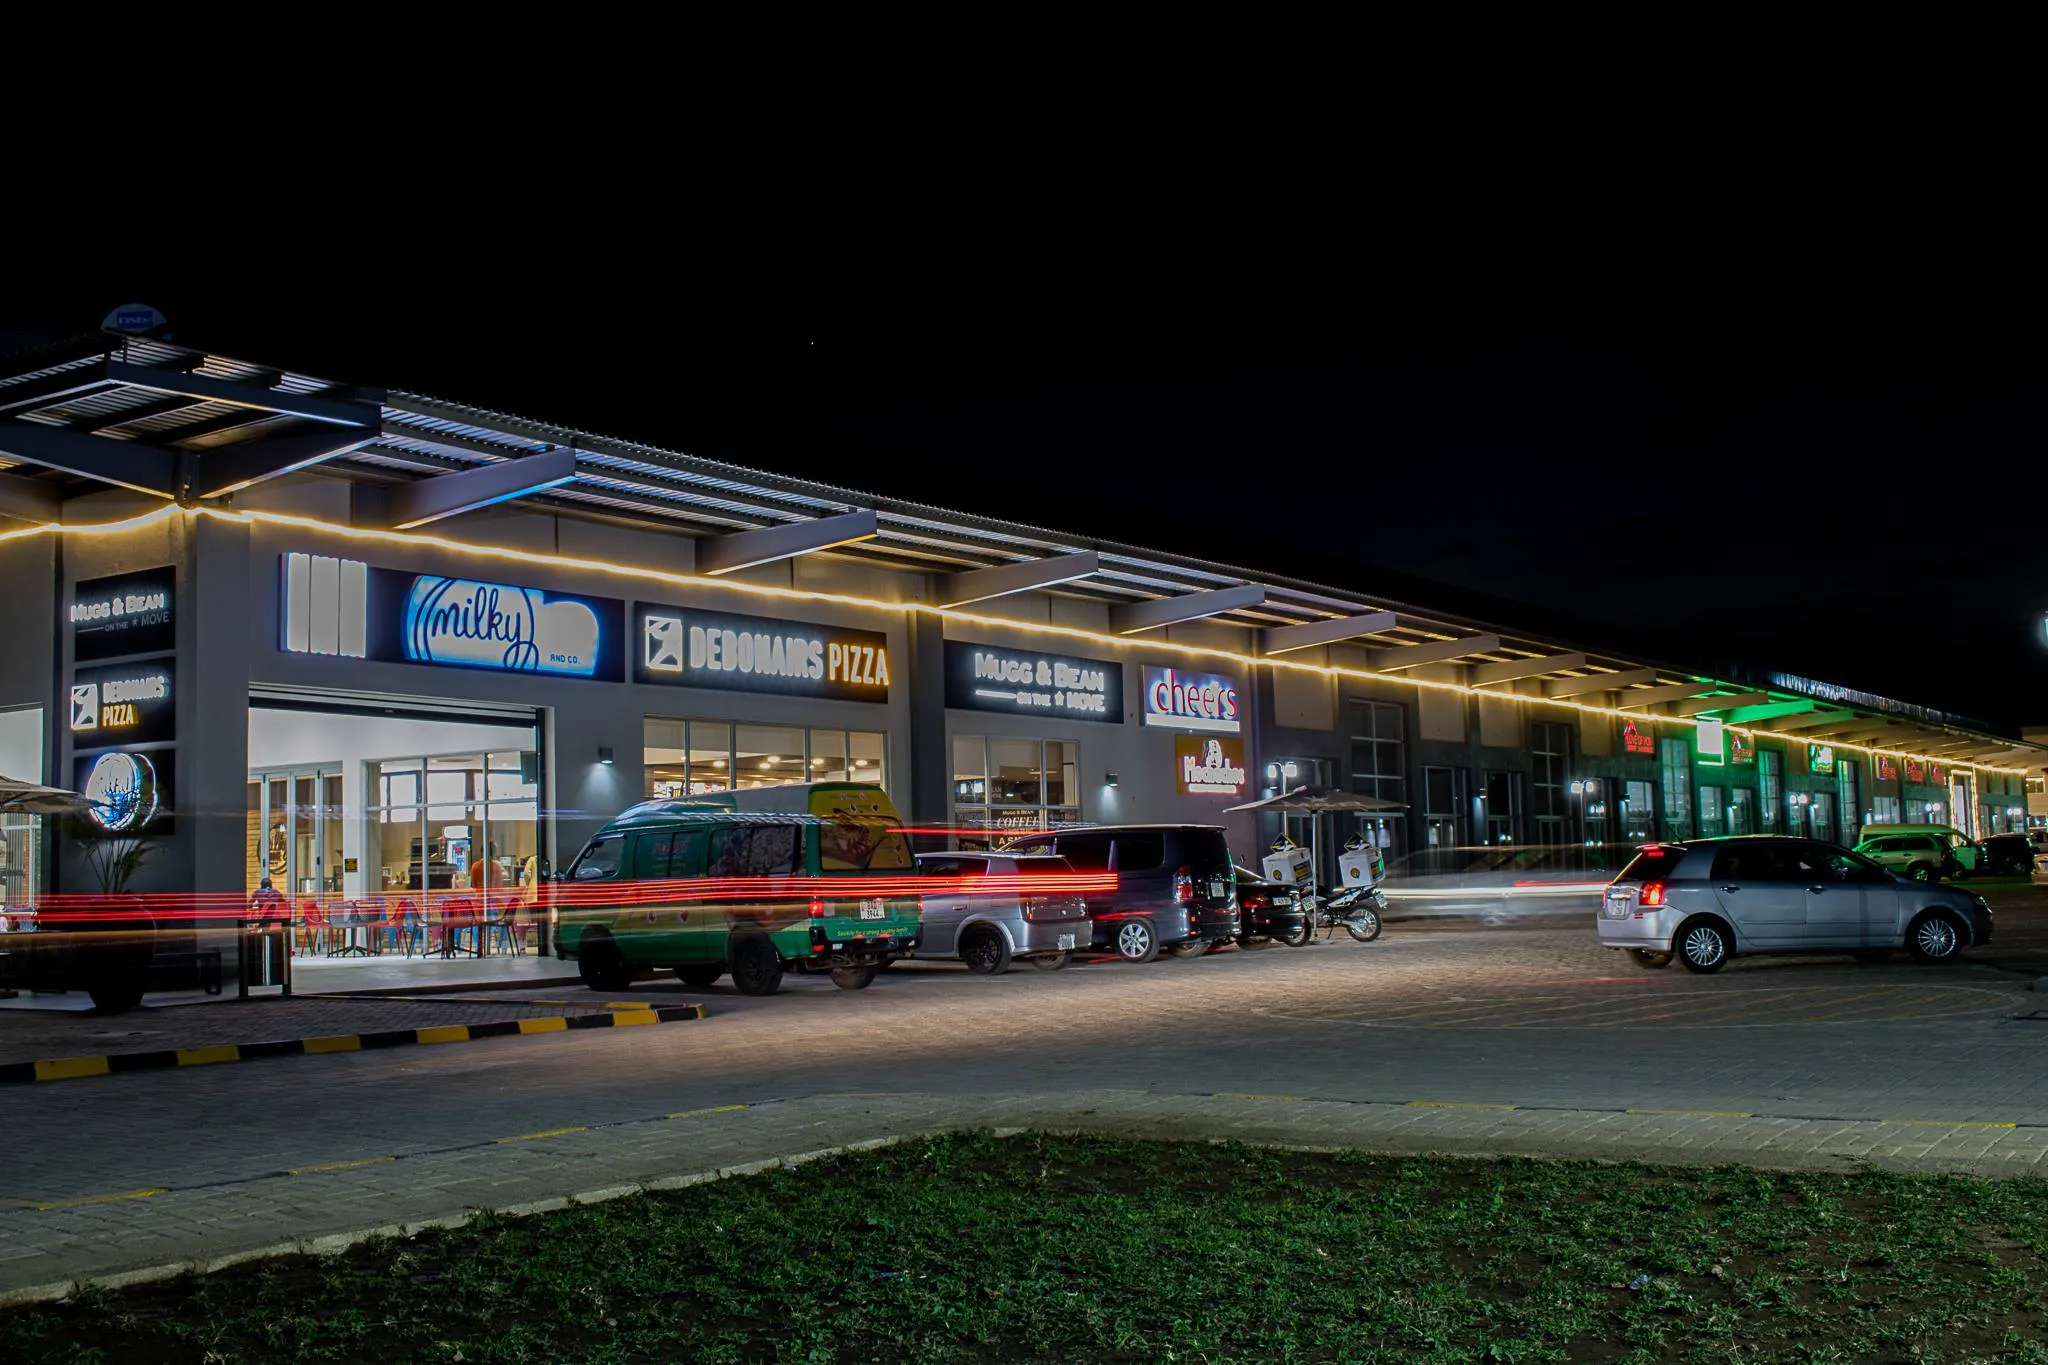 Goldcrest Mall in Zambia, africa | Sporting Equipment,Shoes,Accessories,Clothes,Gifts,Sportswear - Country Helper